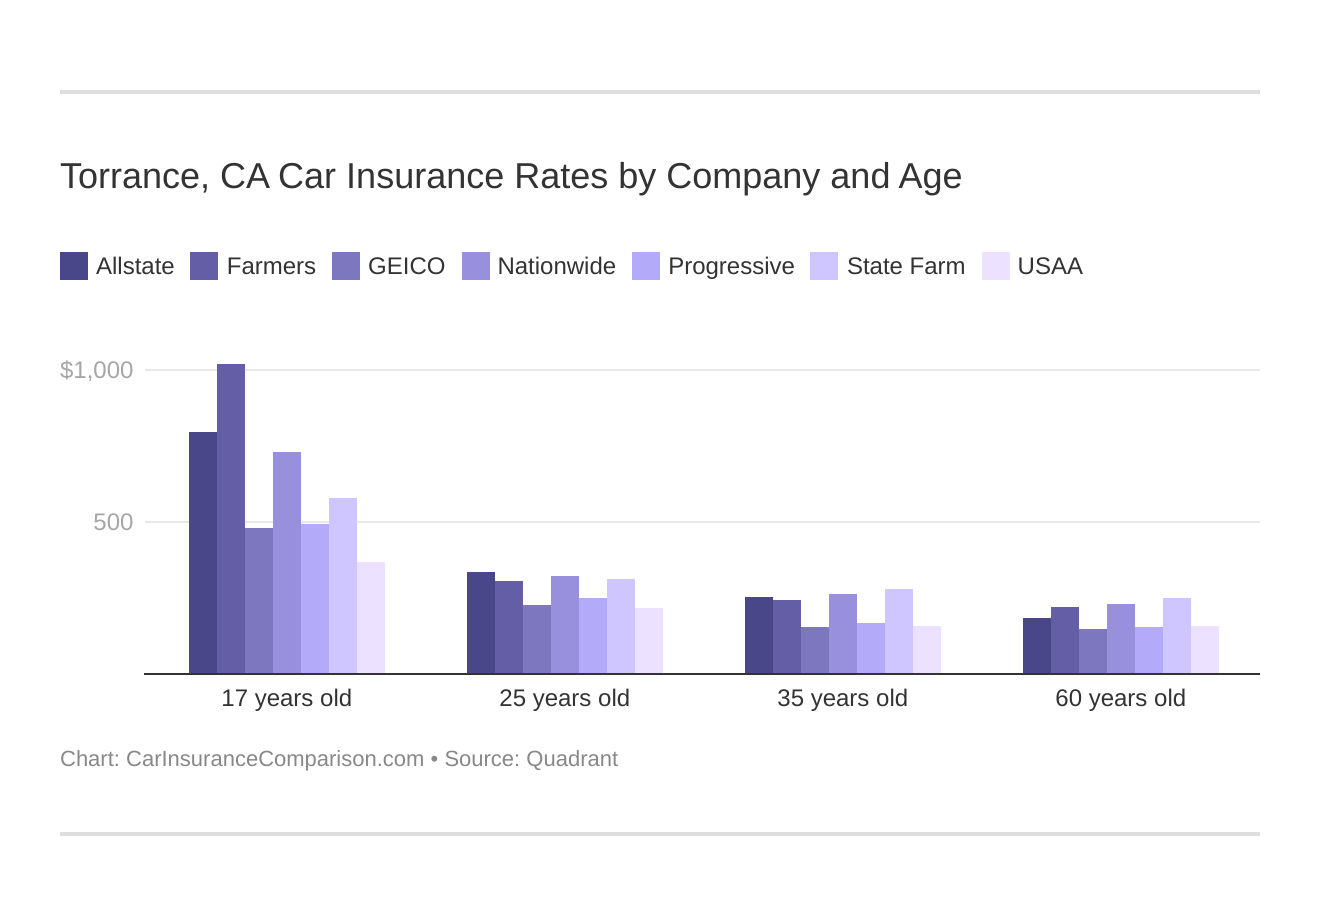 Torrance, CA Car Insurance Rates by Company and Age